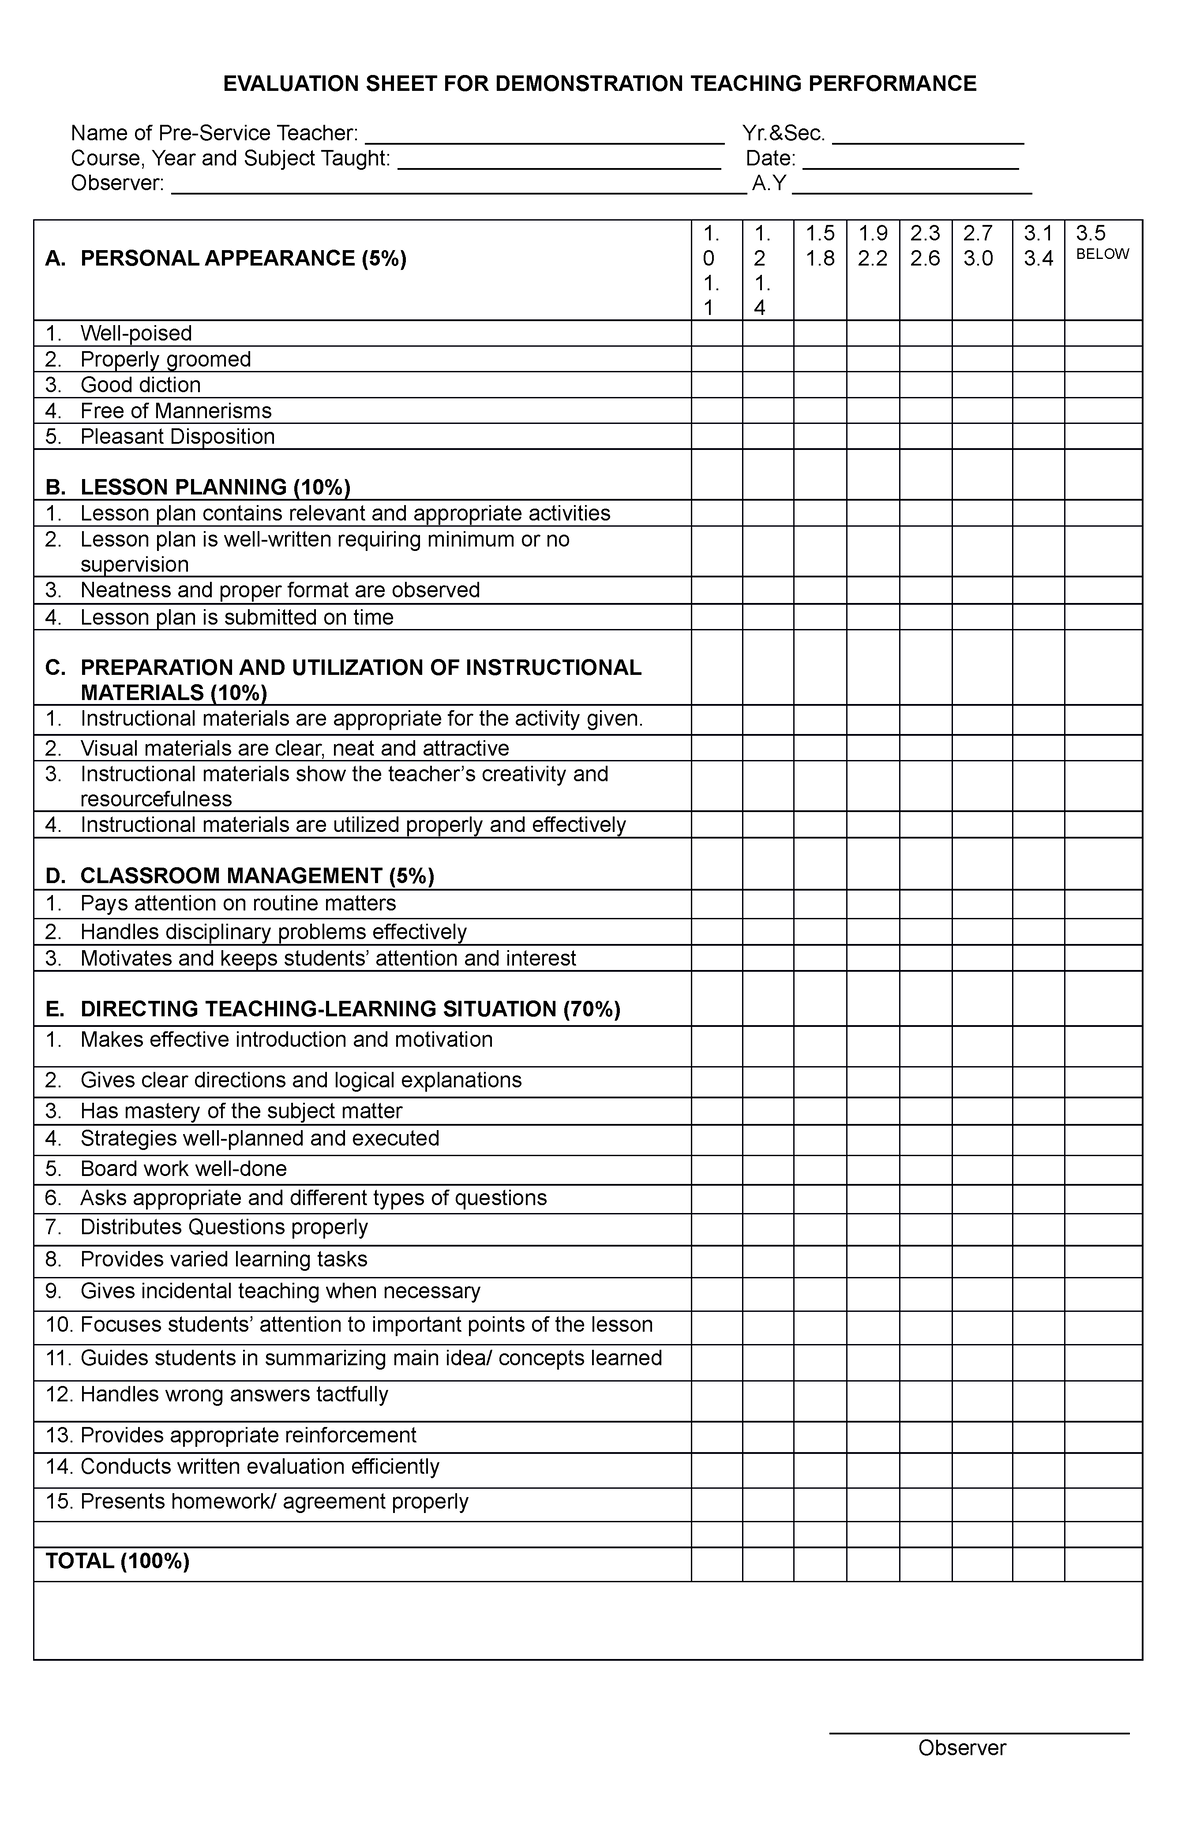 E Evaluation Sheet FOR Demonstration Teaching Performance - EVALUATION ...